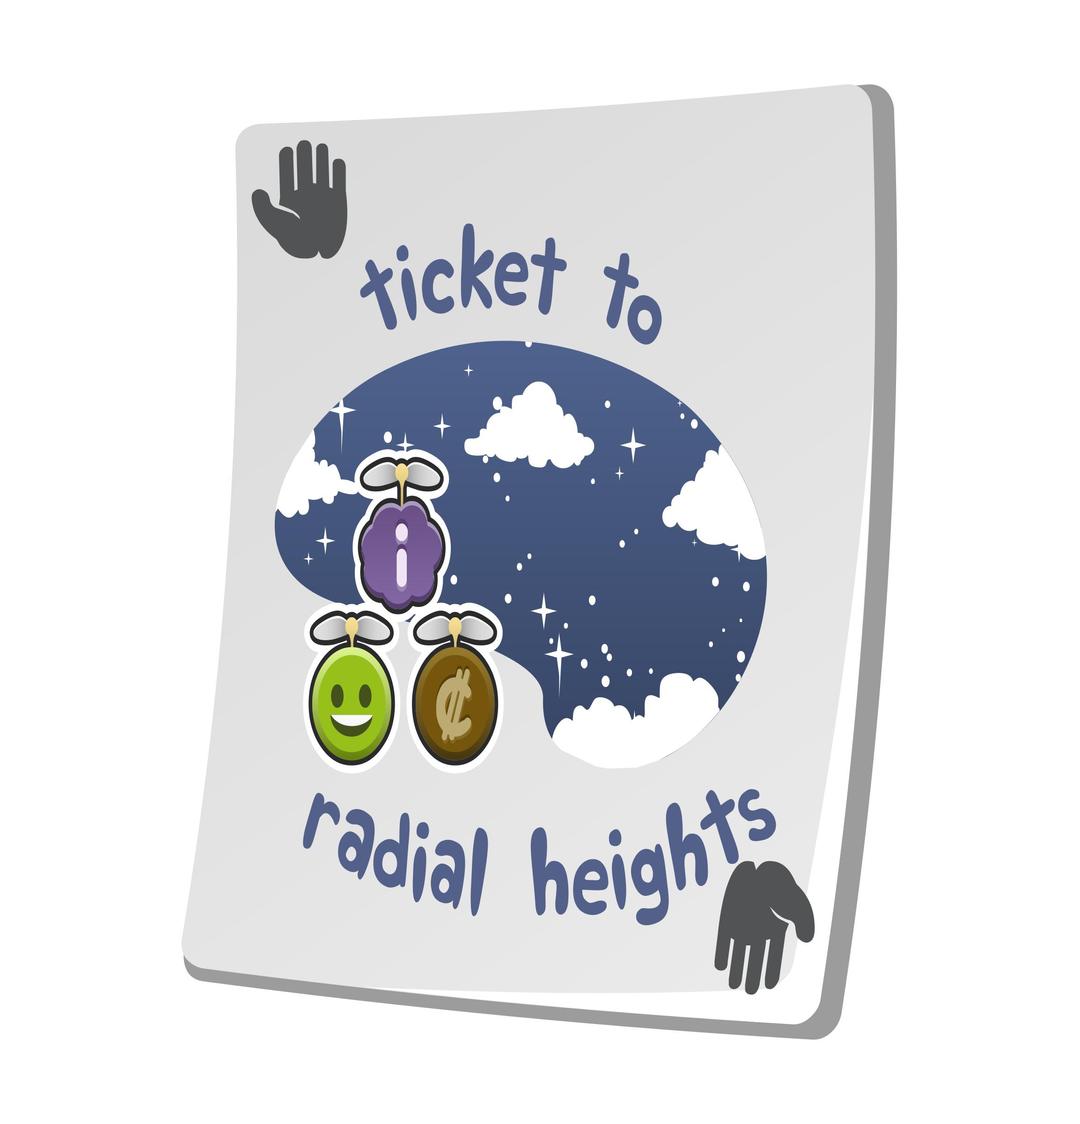 Misc Paradise Ticket Radial Heights png transparent